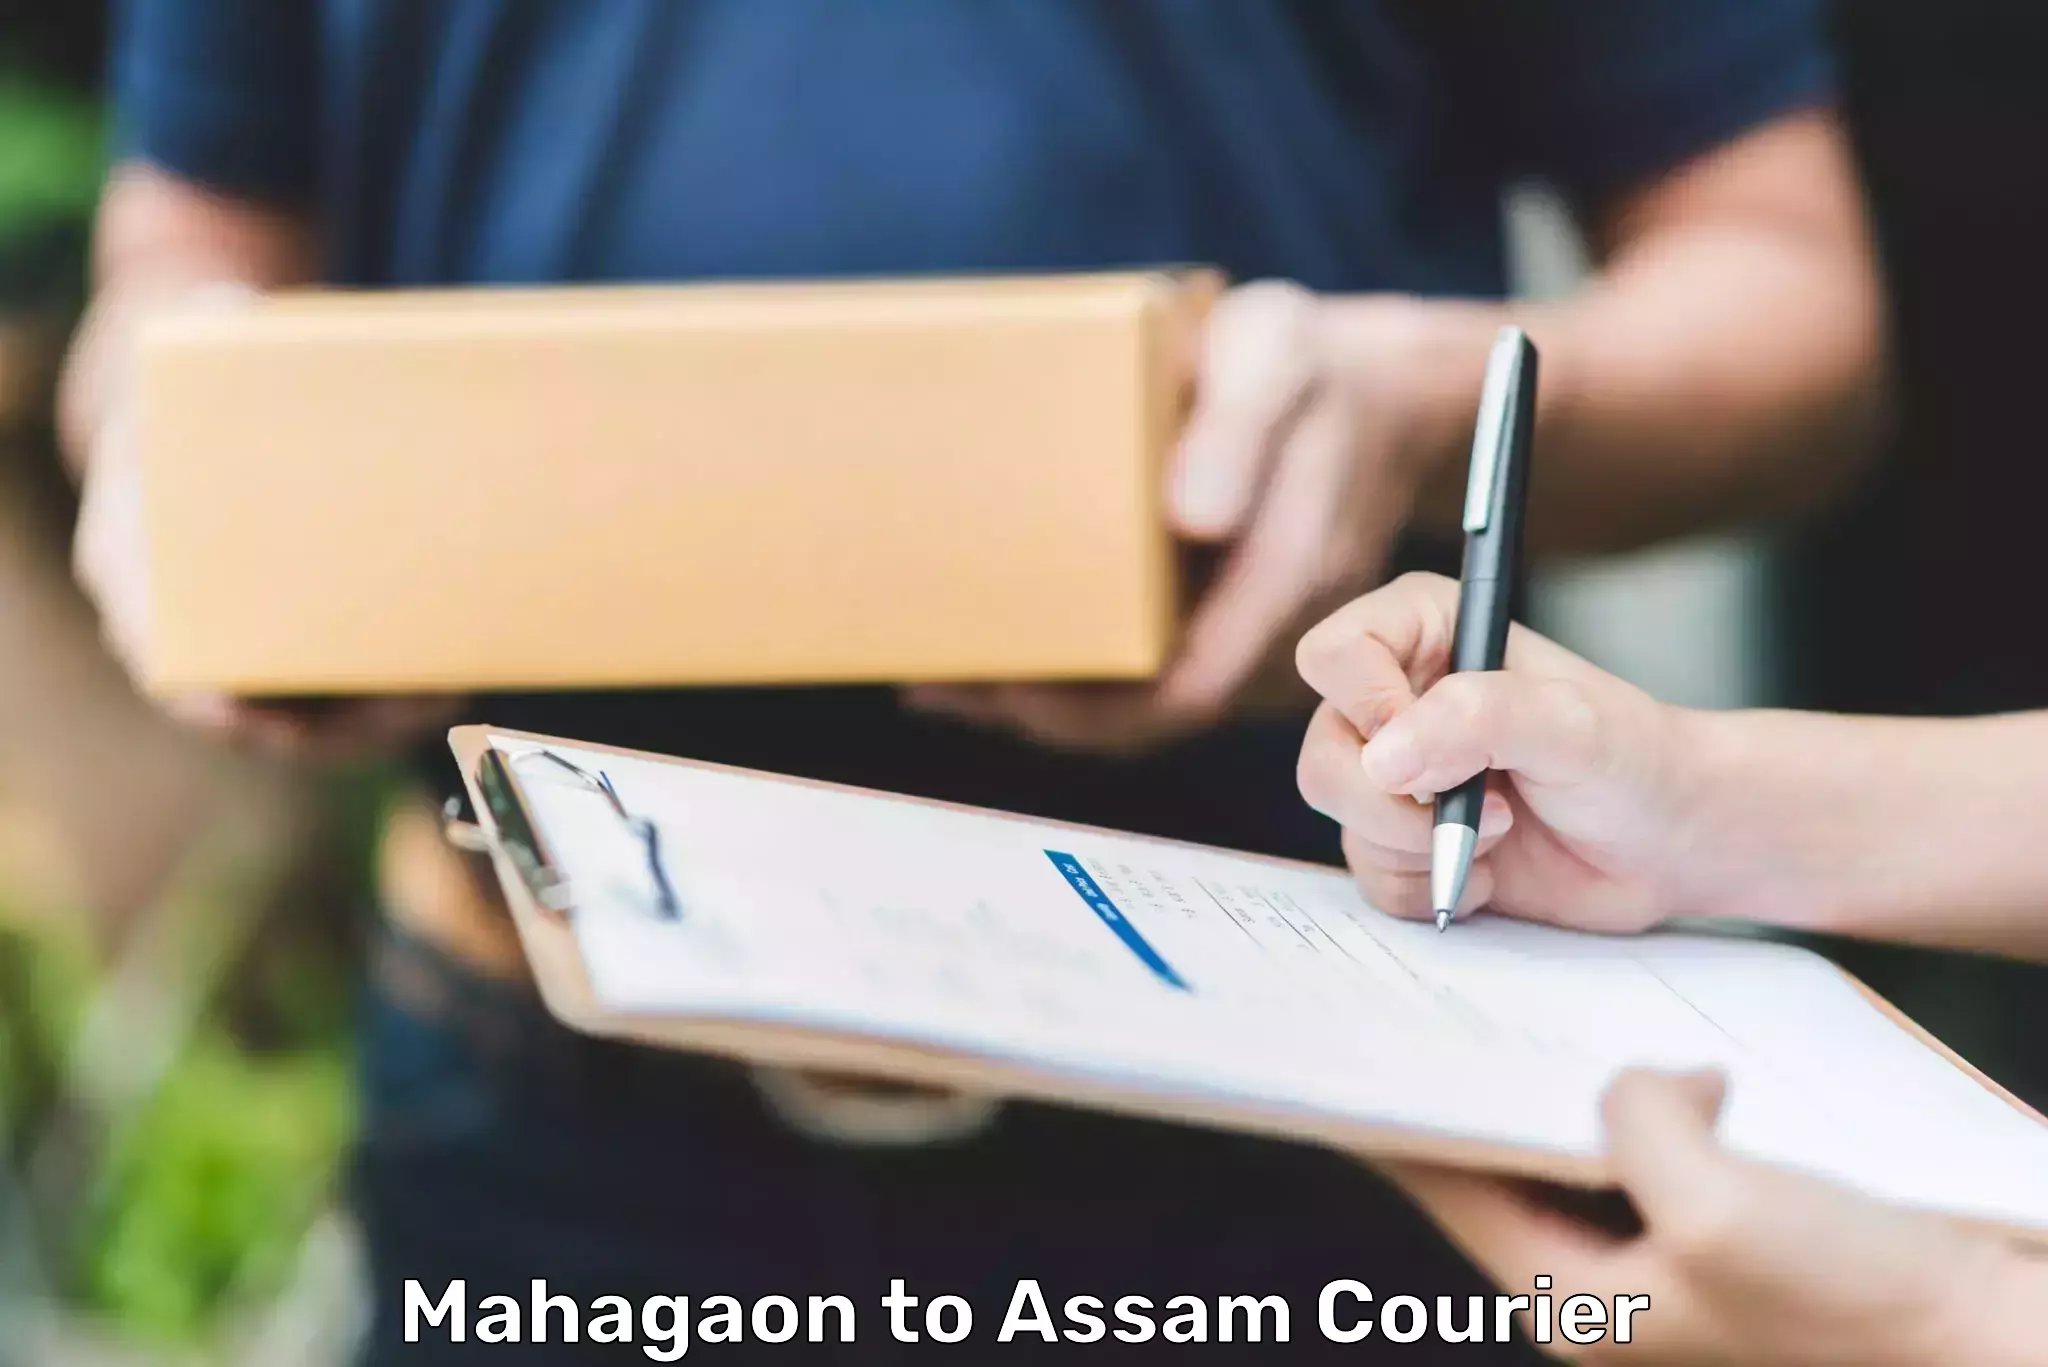 State-of-the-art courier technology Mahagaon to Mazbat